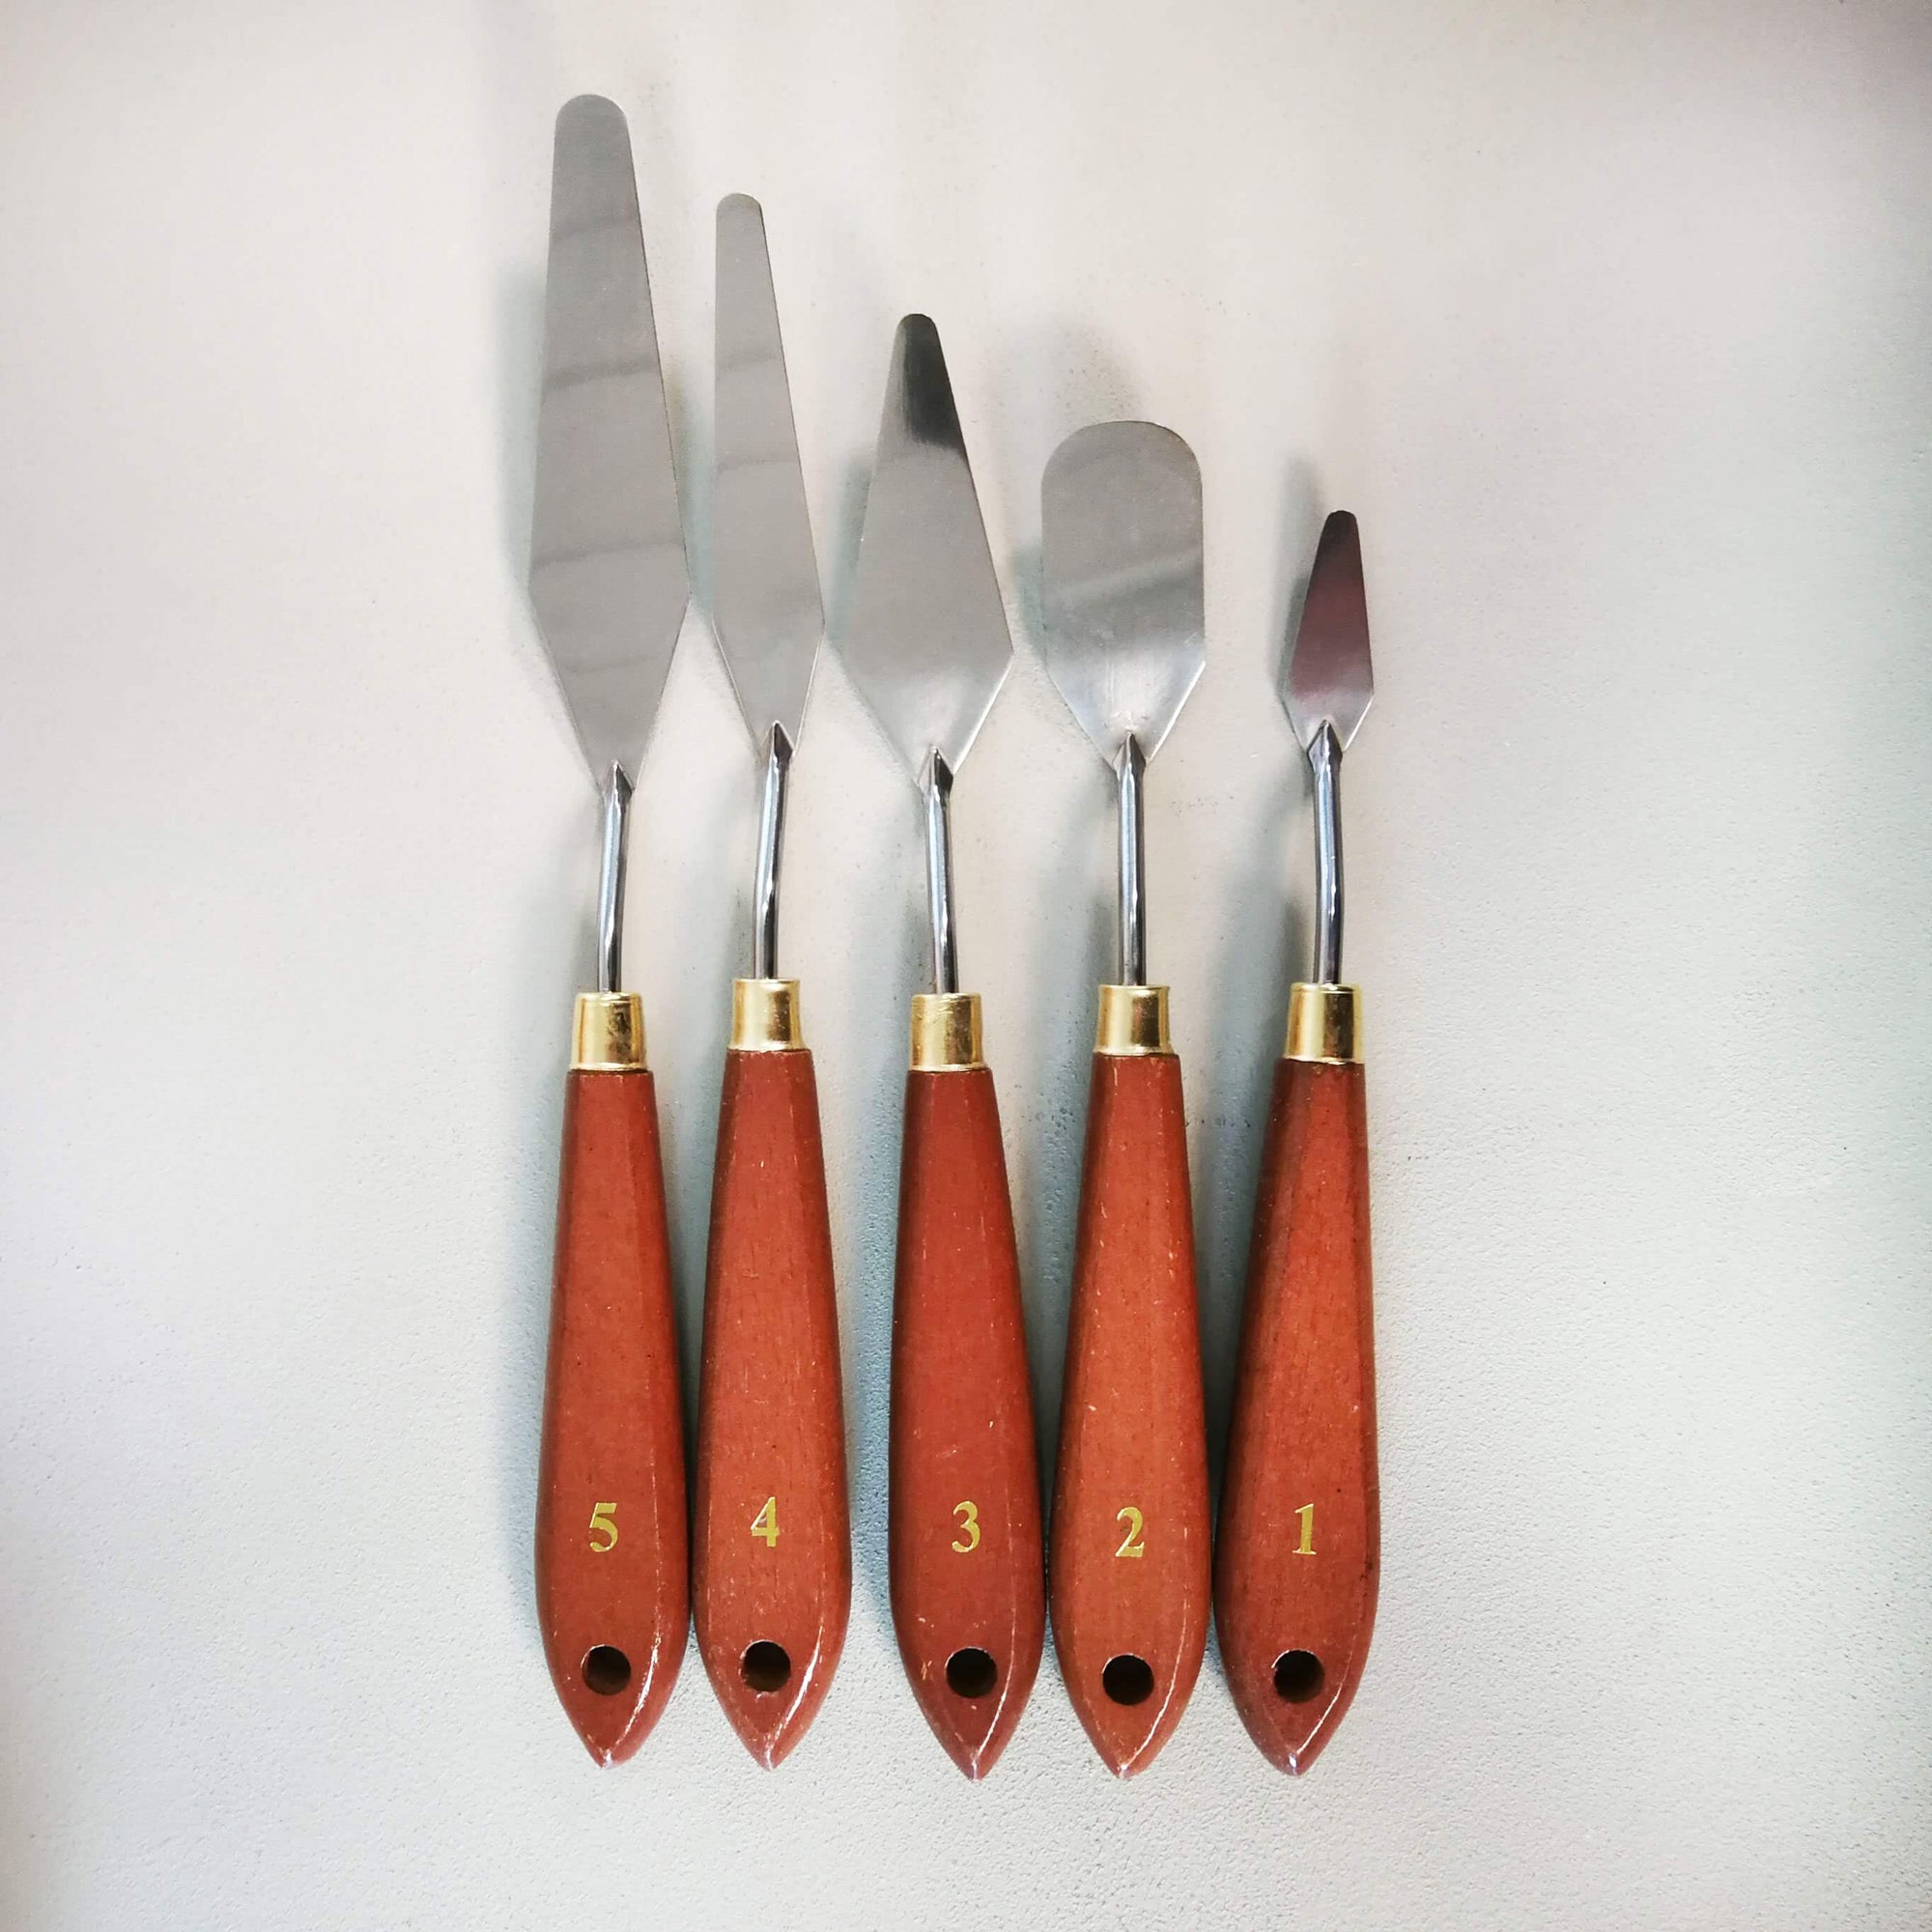 Discover the Benefits of Painting Knives